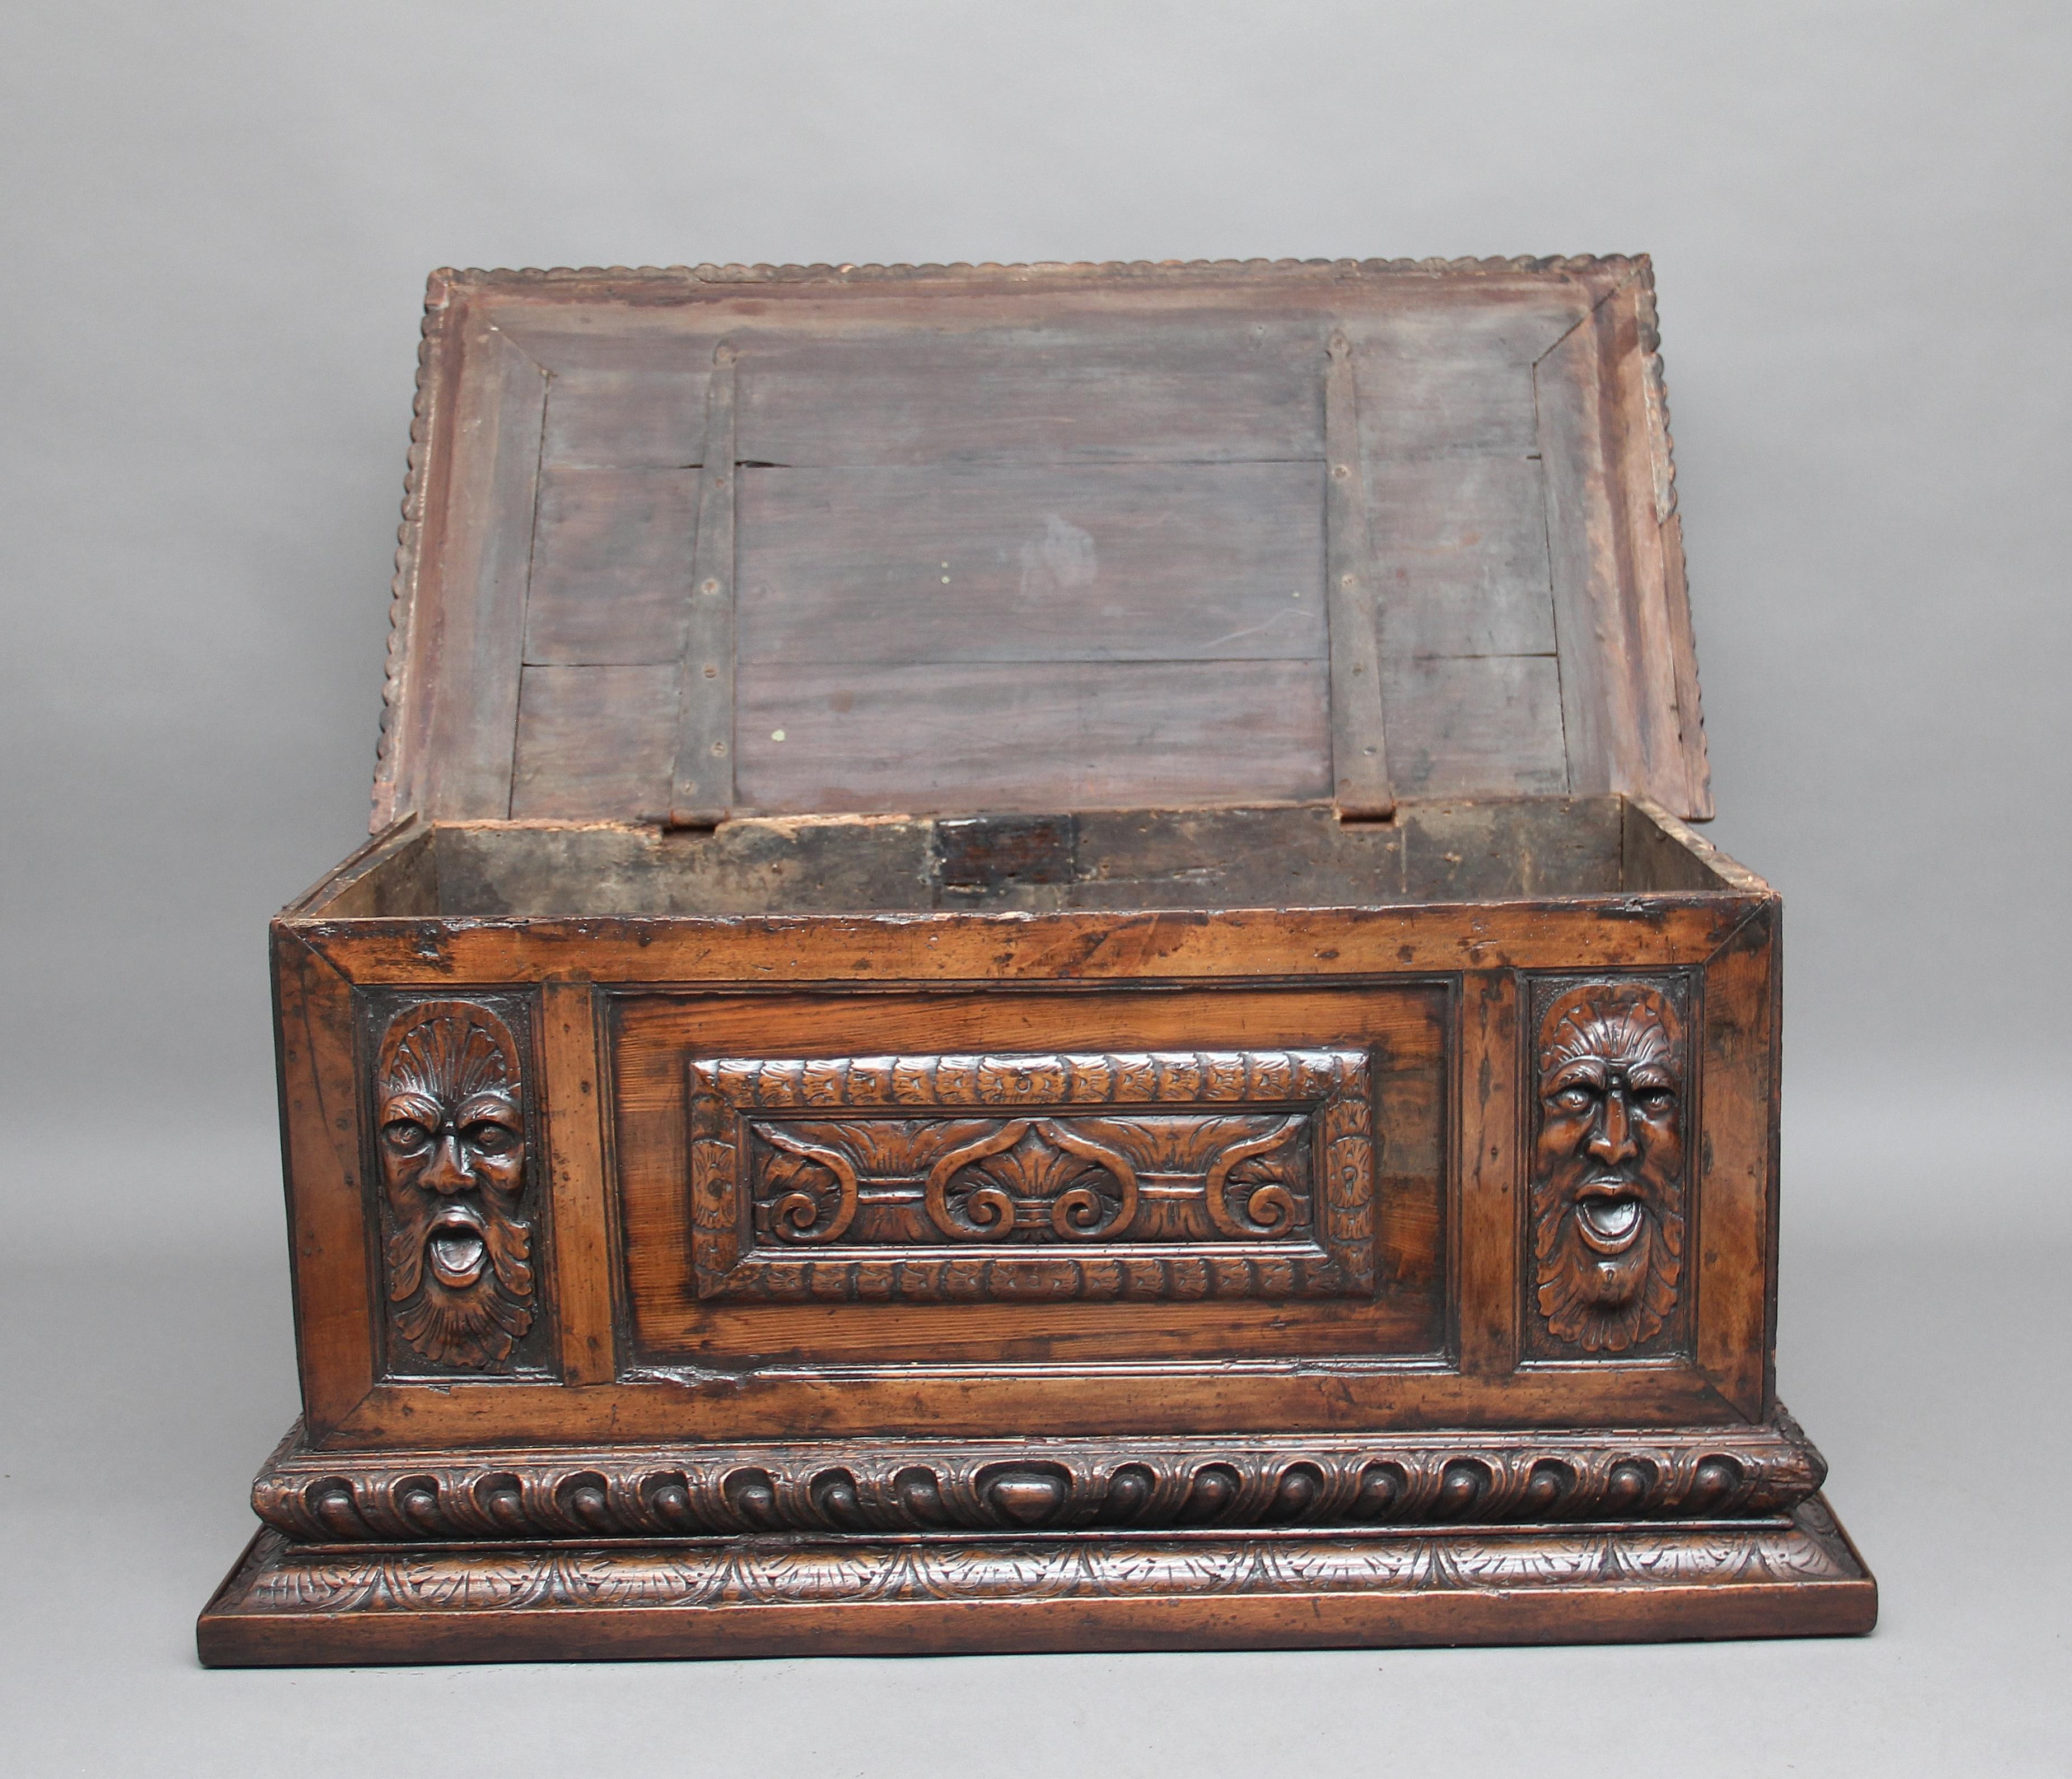 Early 19th century carved fruitwood Italian coffer / cassone, with fabulous carved moldings around the base, having a pair of grotesque faces either side of a carved centre panel and carved panels on the sides, the lift up top having a gadrooned